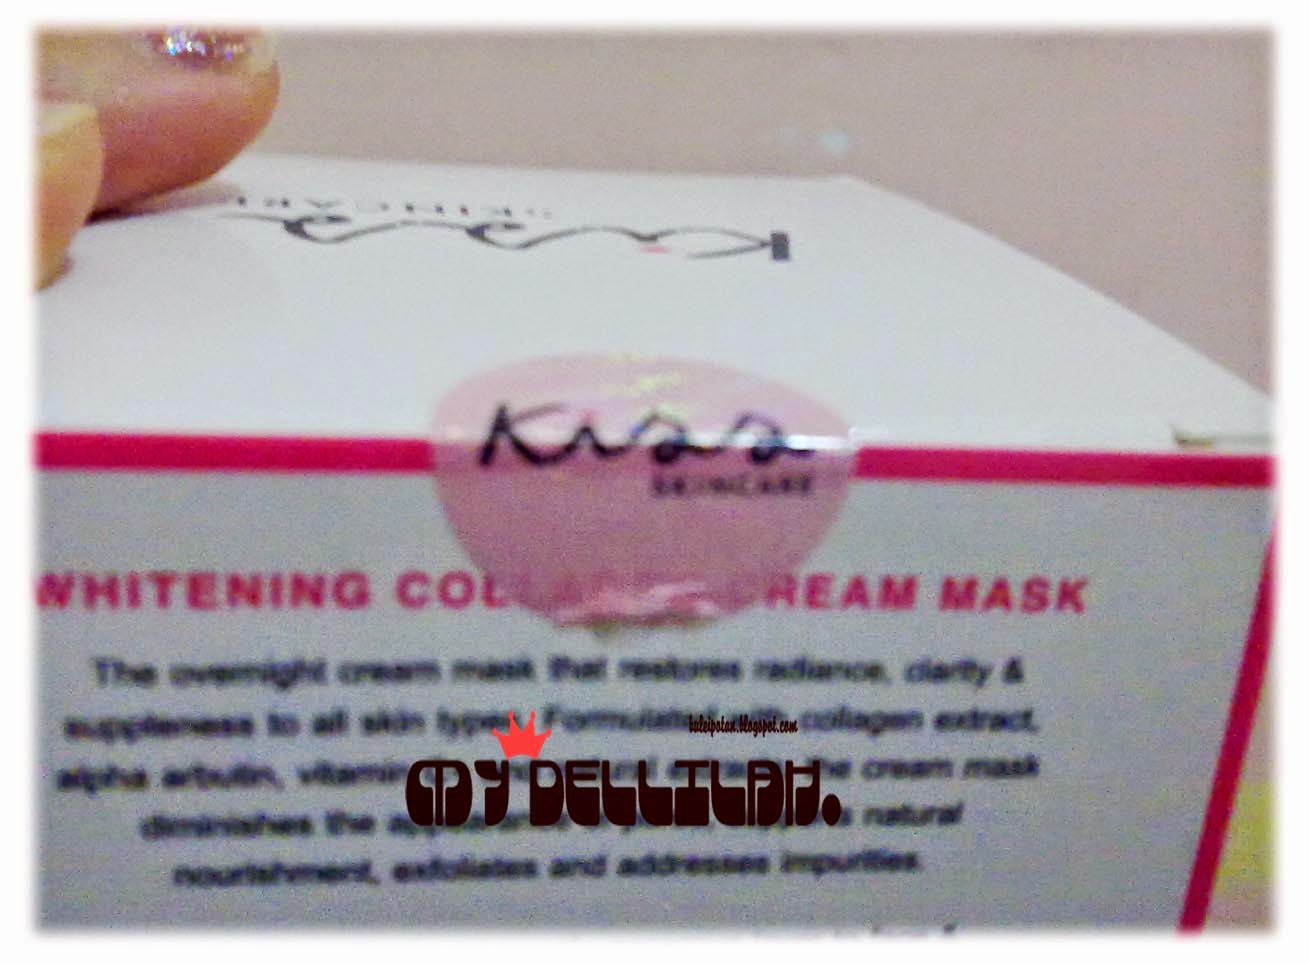 Kiss Mask Review